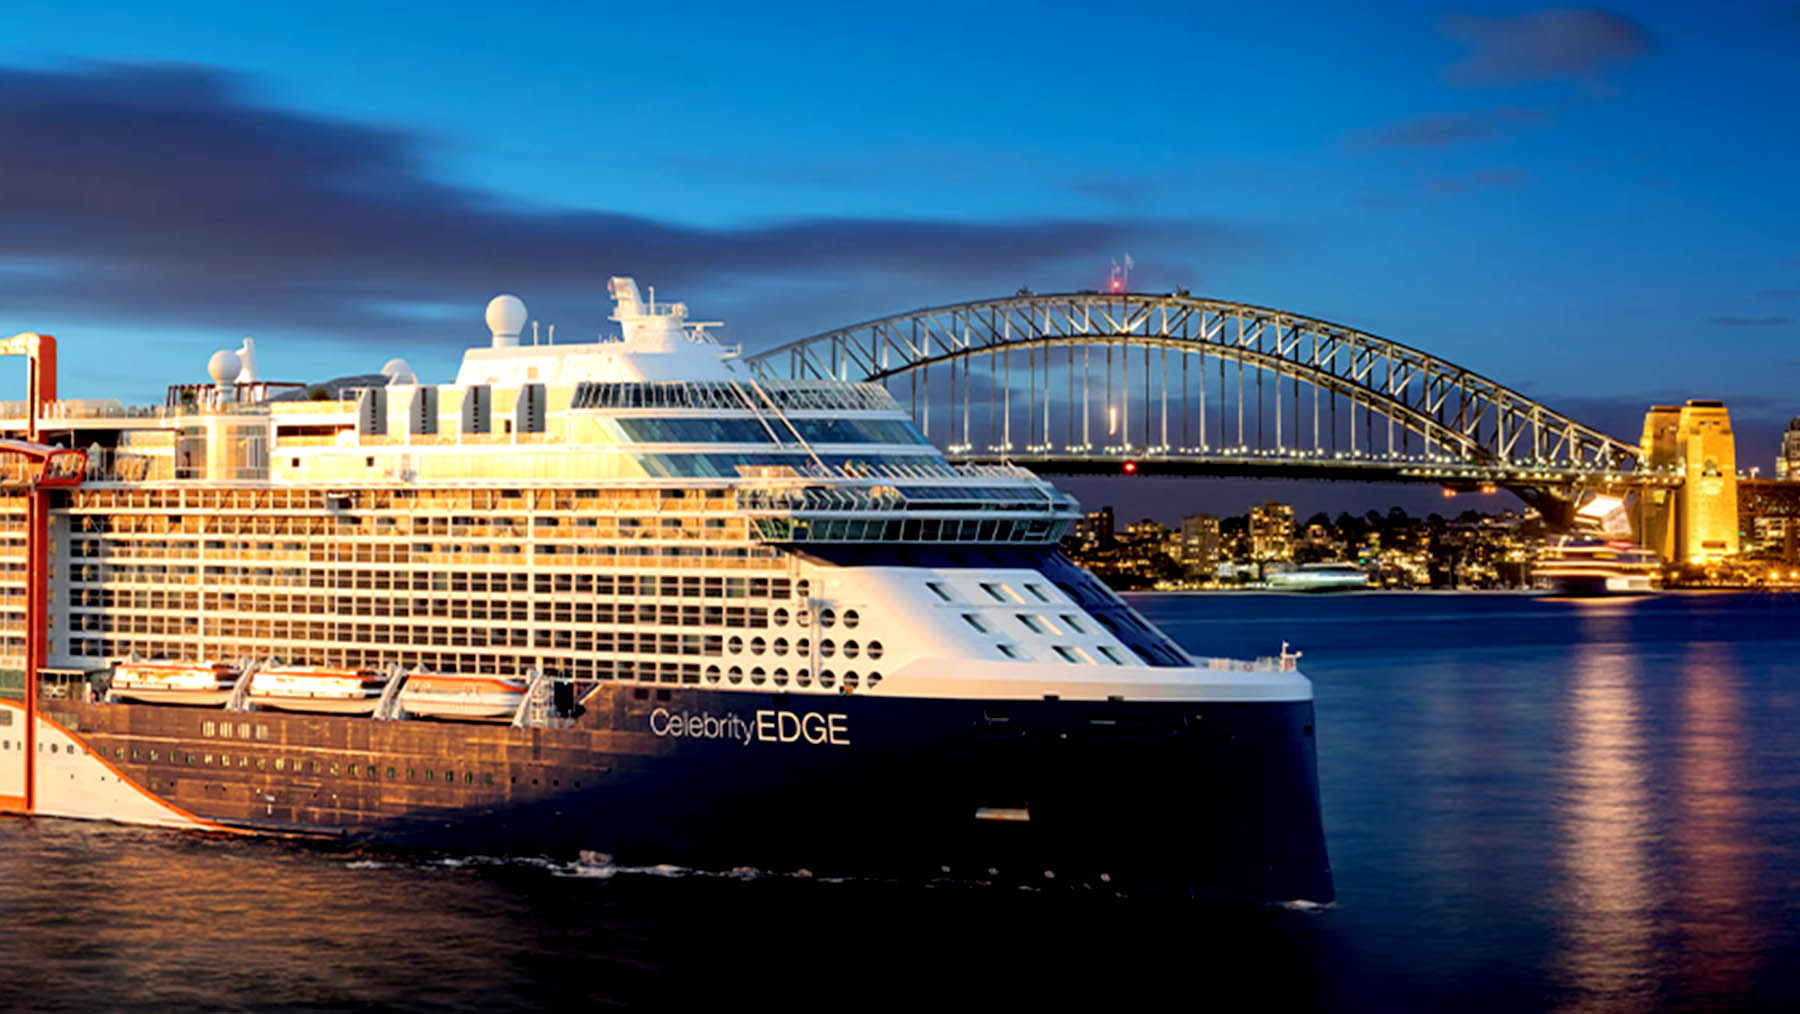 Celebrity Edge gets ready for a repositioning cruise from Australia to Hawaii. 